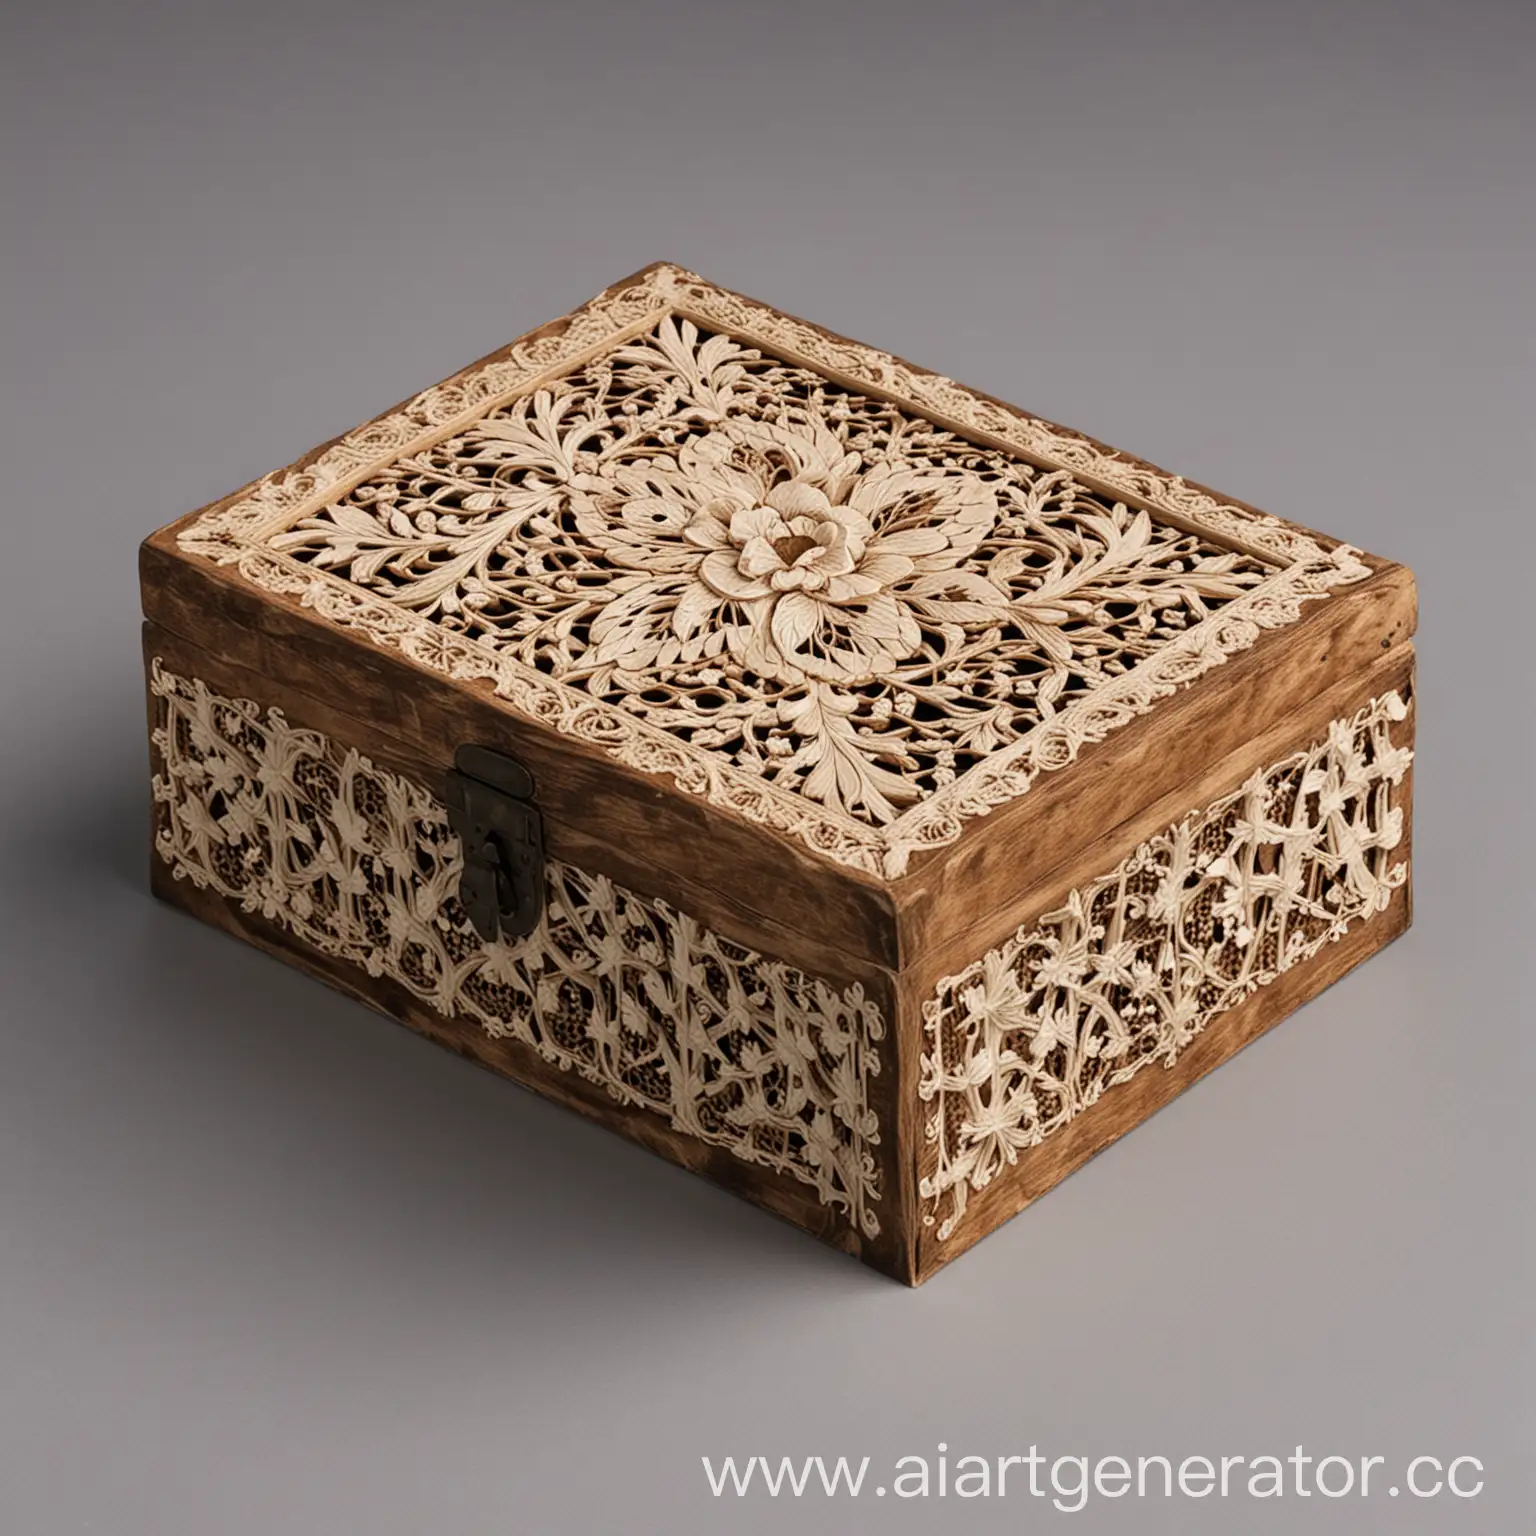 Ornate-Wooden-Box-with-Bone-Fishnet-Inserts-and-Floral-Ornaments